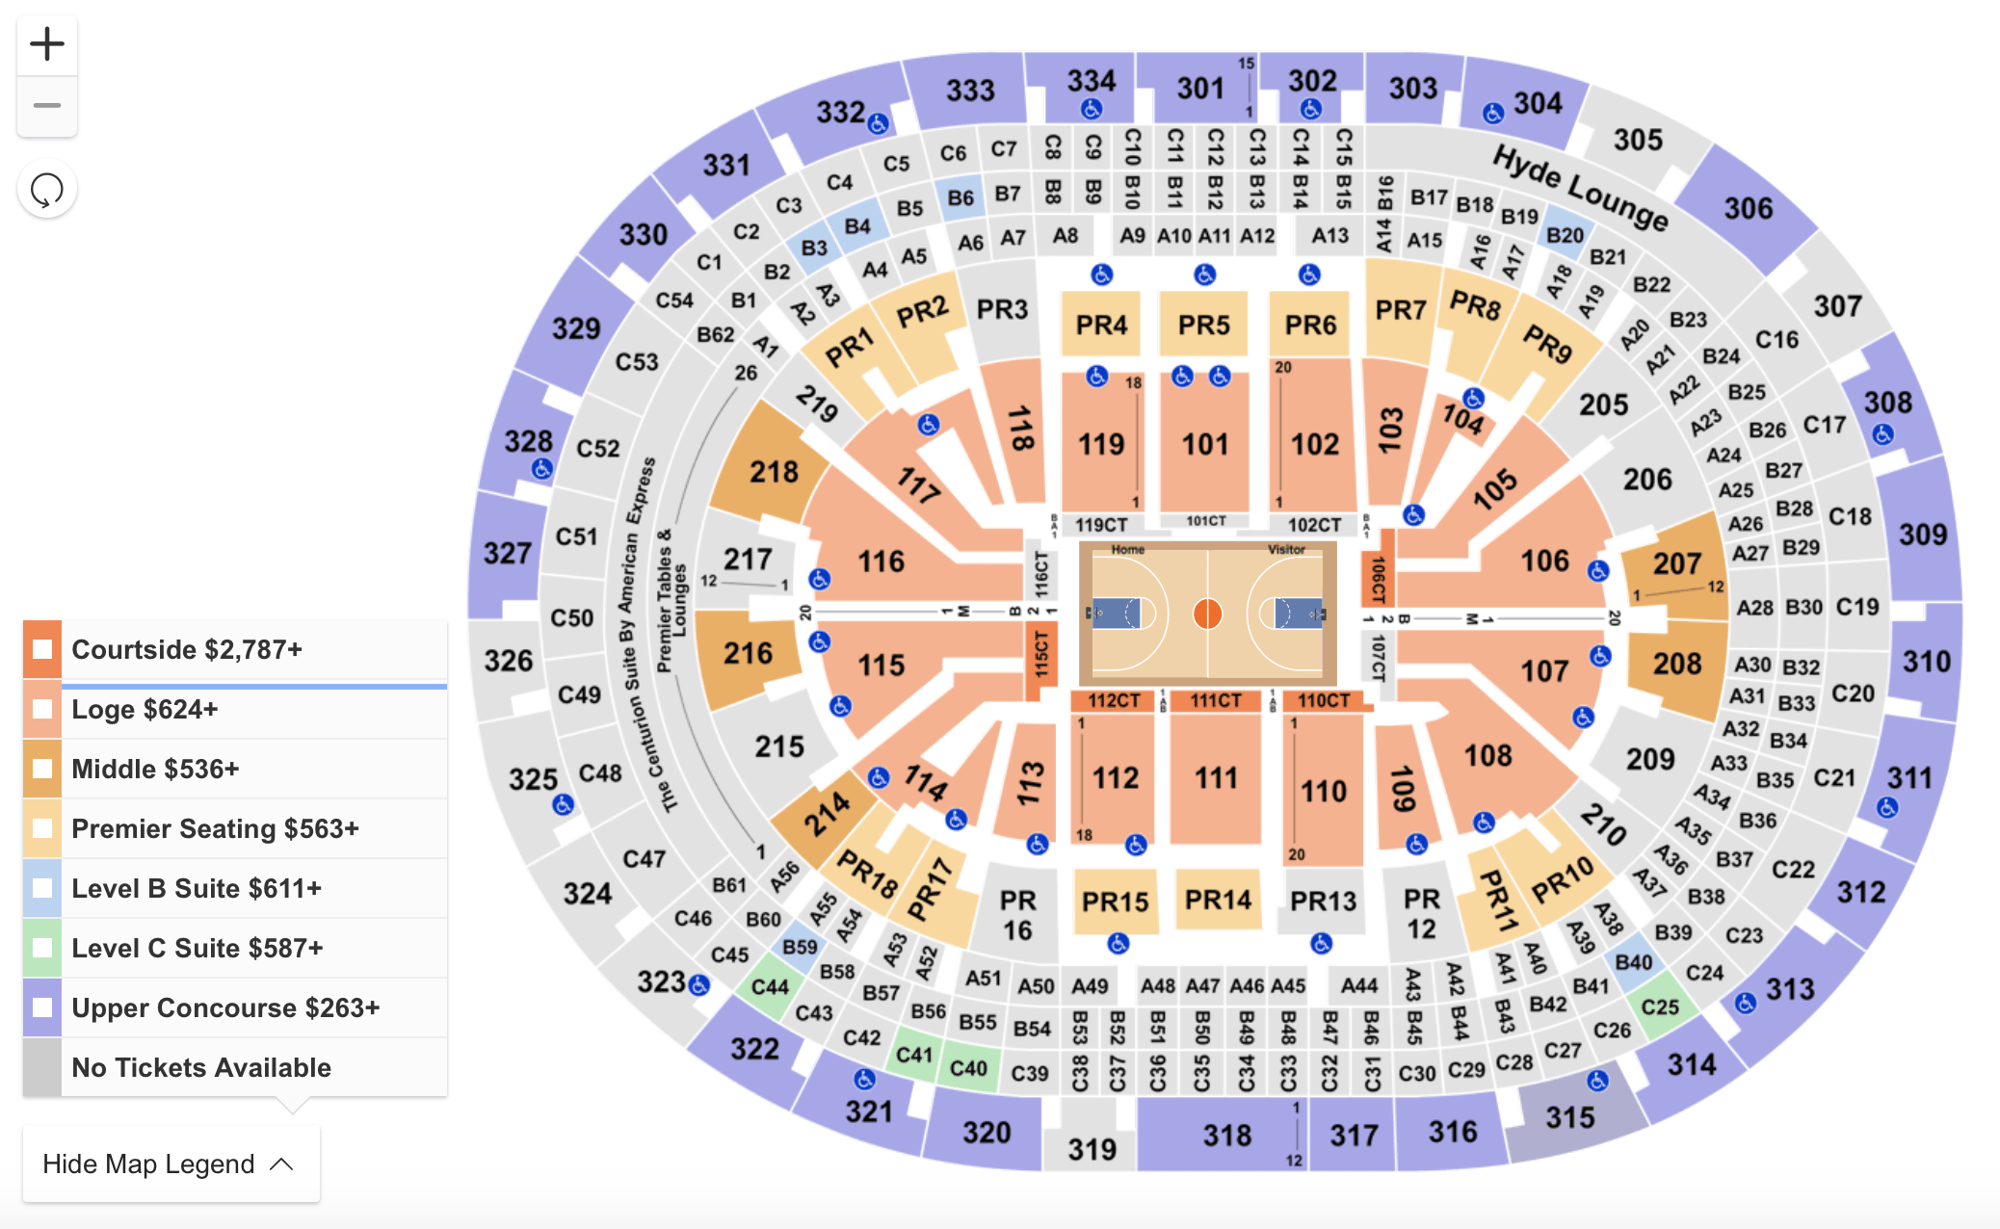 Where to Find The Cheapest Clippers vs. Lakers Tickets on 3/8/20